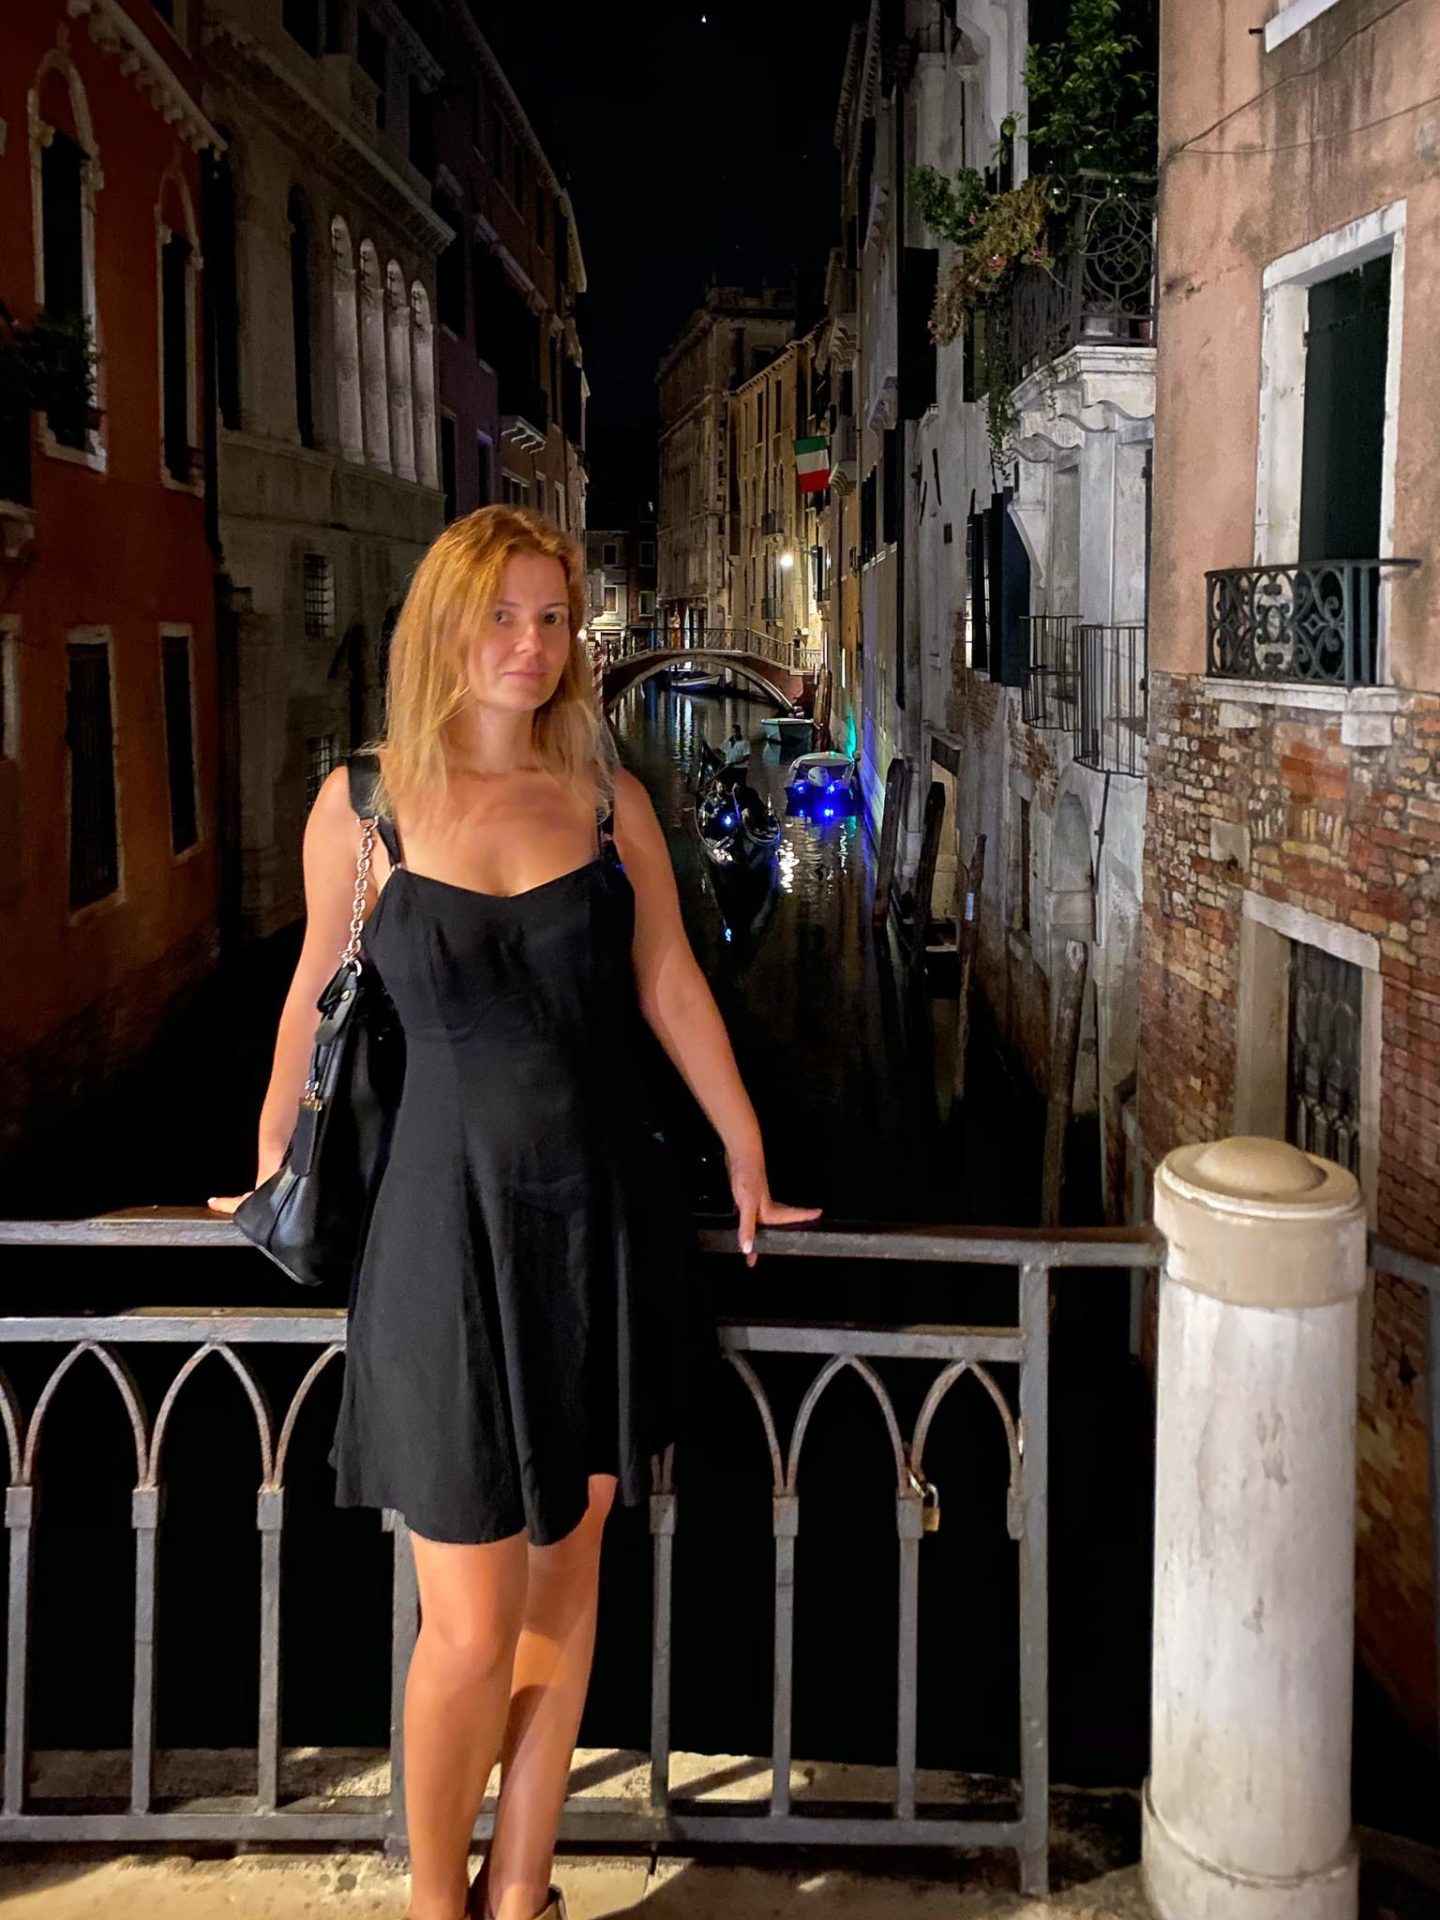 Venice Stories by The Athenian Girl